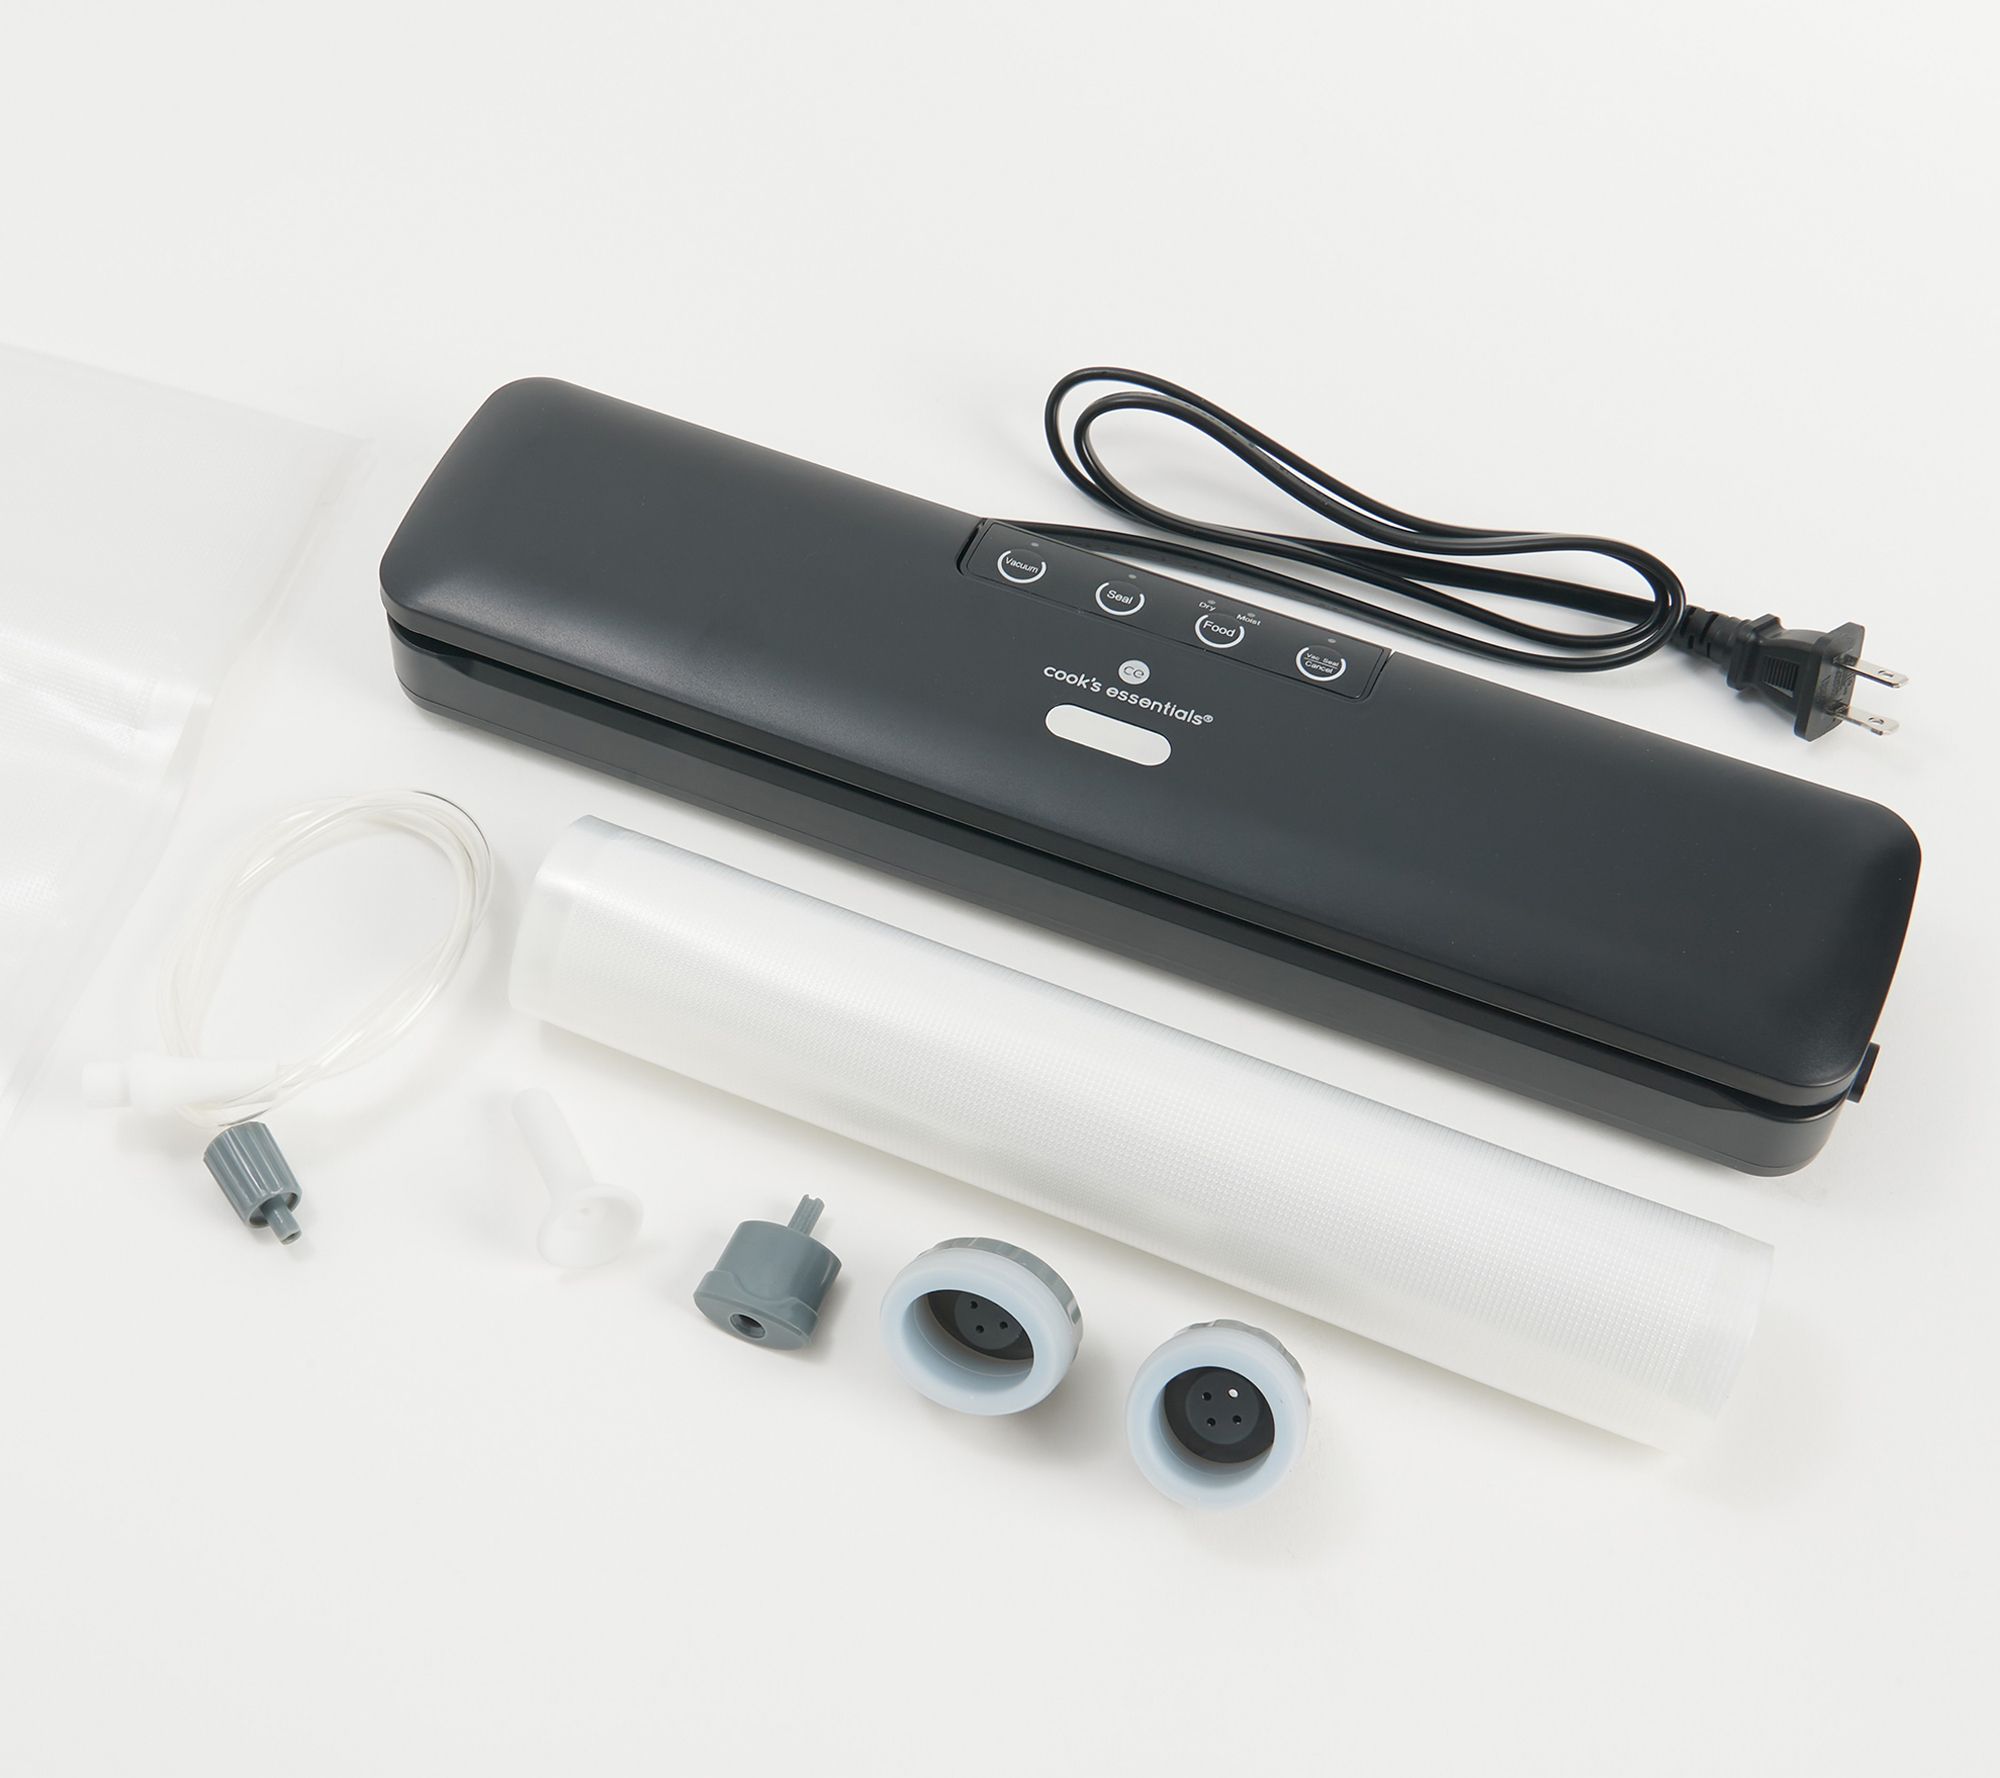 Cook's Essentials Compact Vacuum Sealer with Sealing Bags